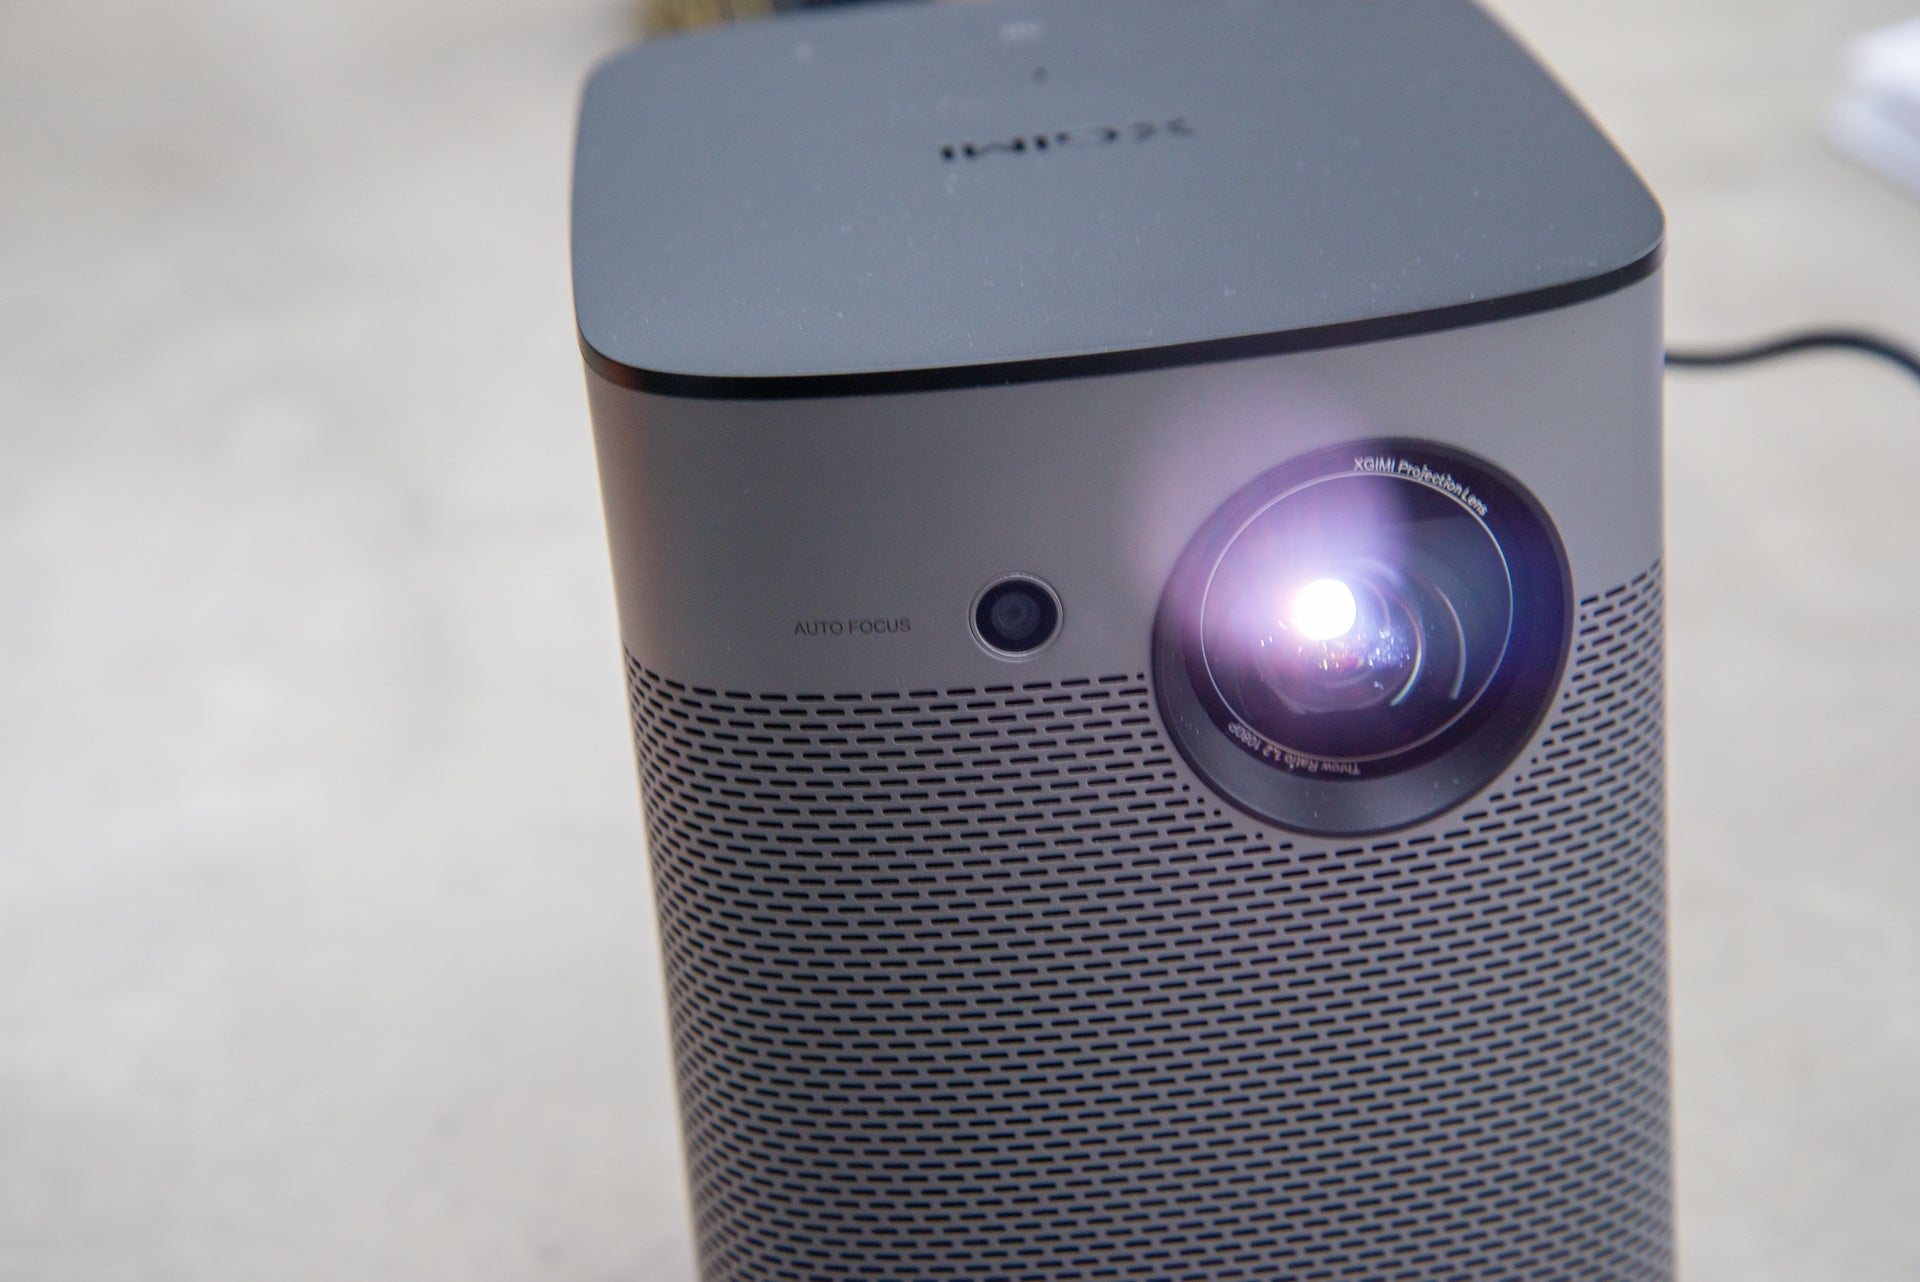 XGIMI Halo Review: The brightest portable projector | Trusted Reviews